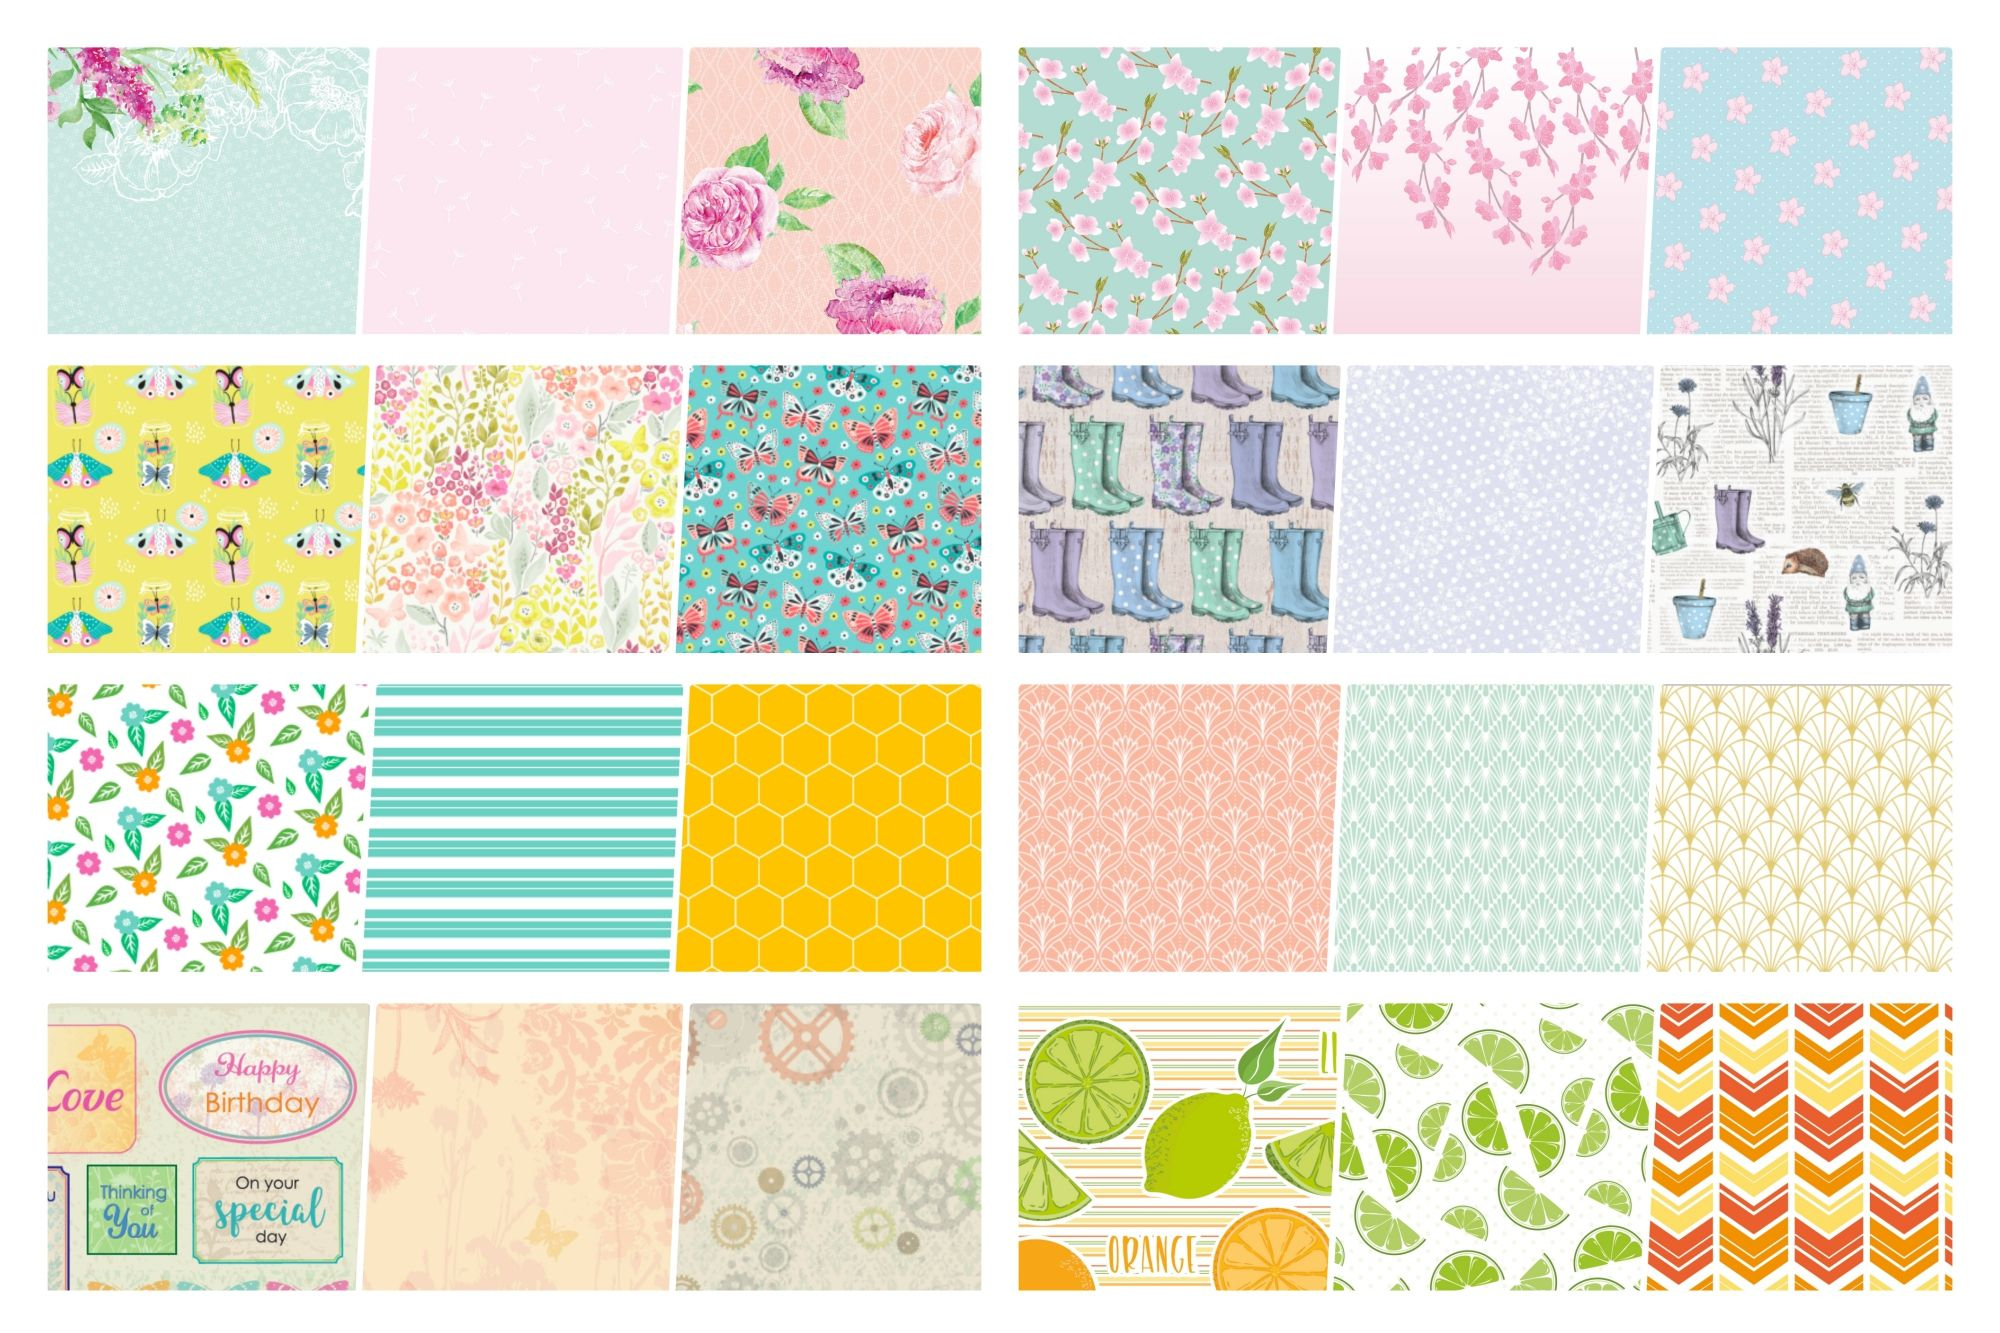 105 Free Printable Papers regarding Free Printable Backgrounds For Paper